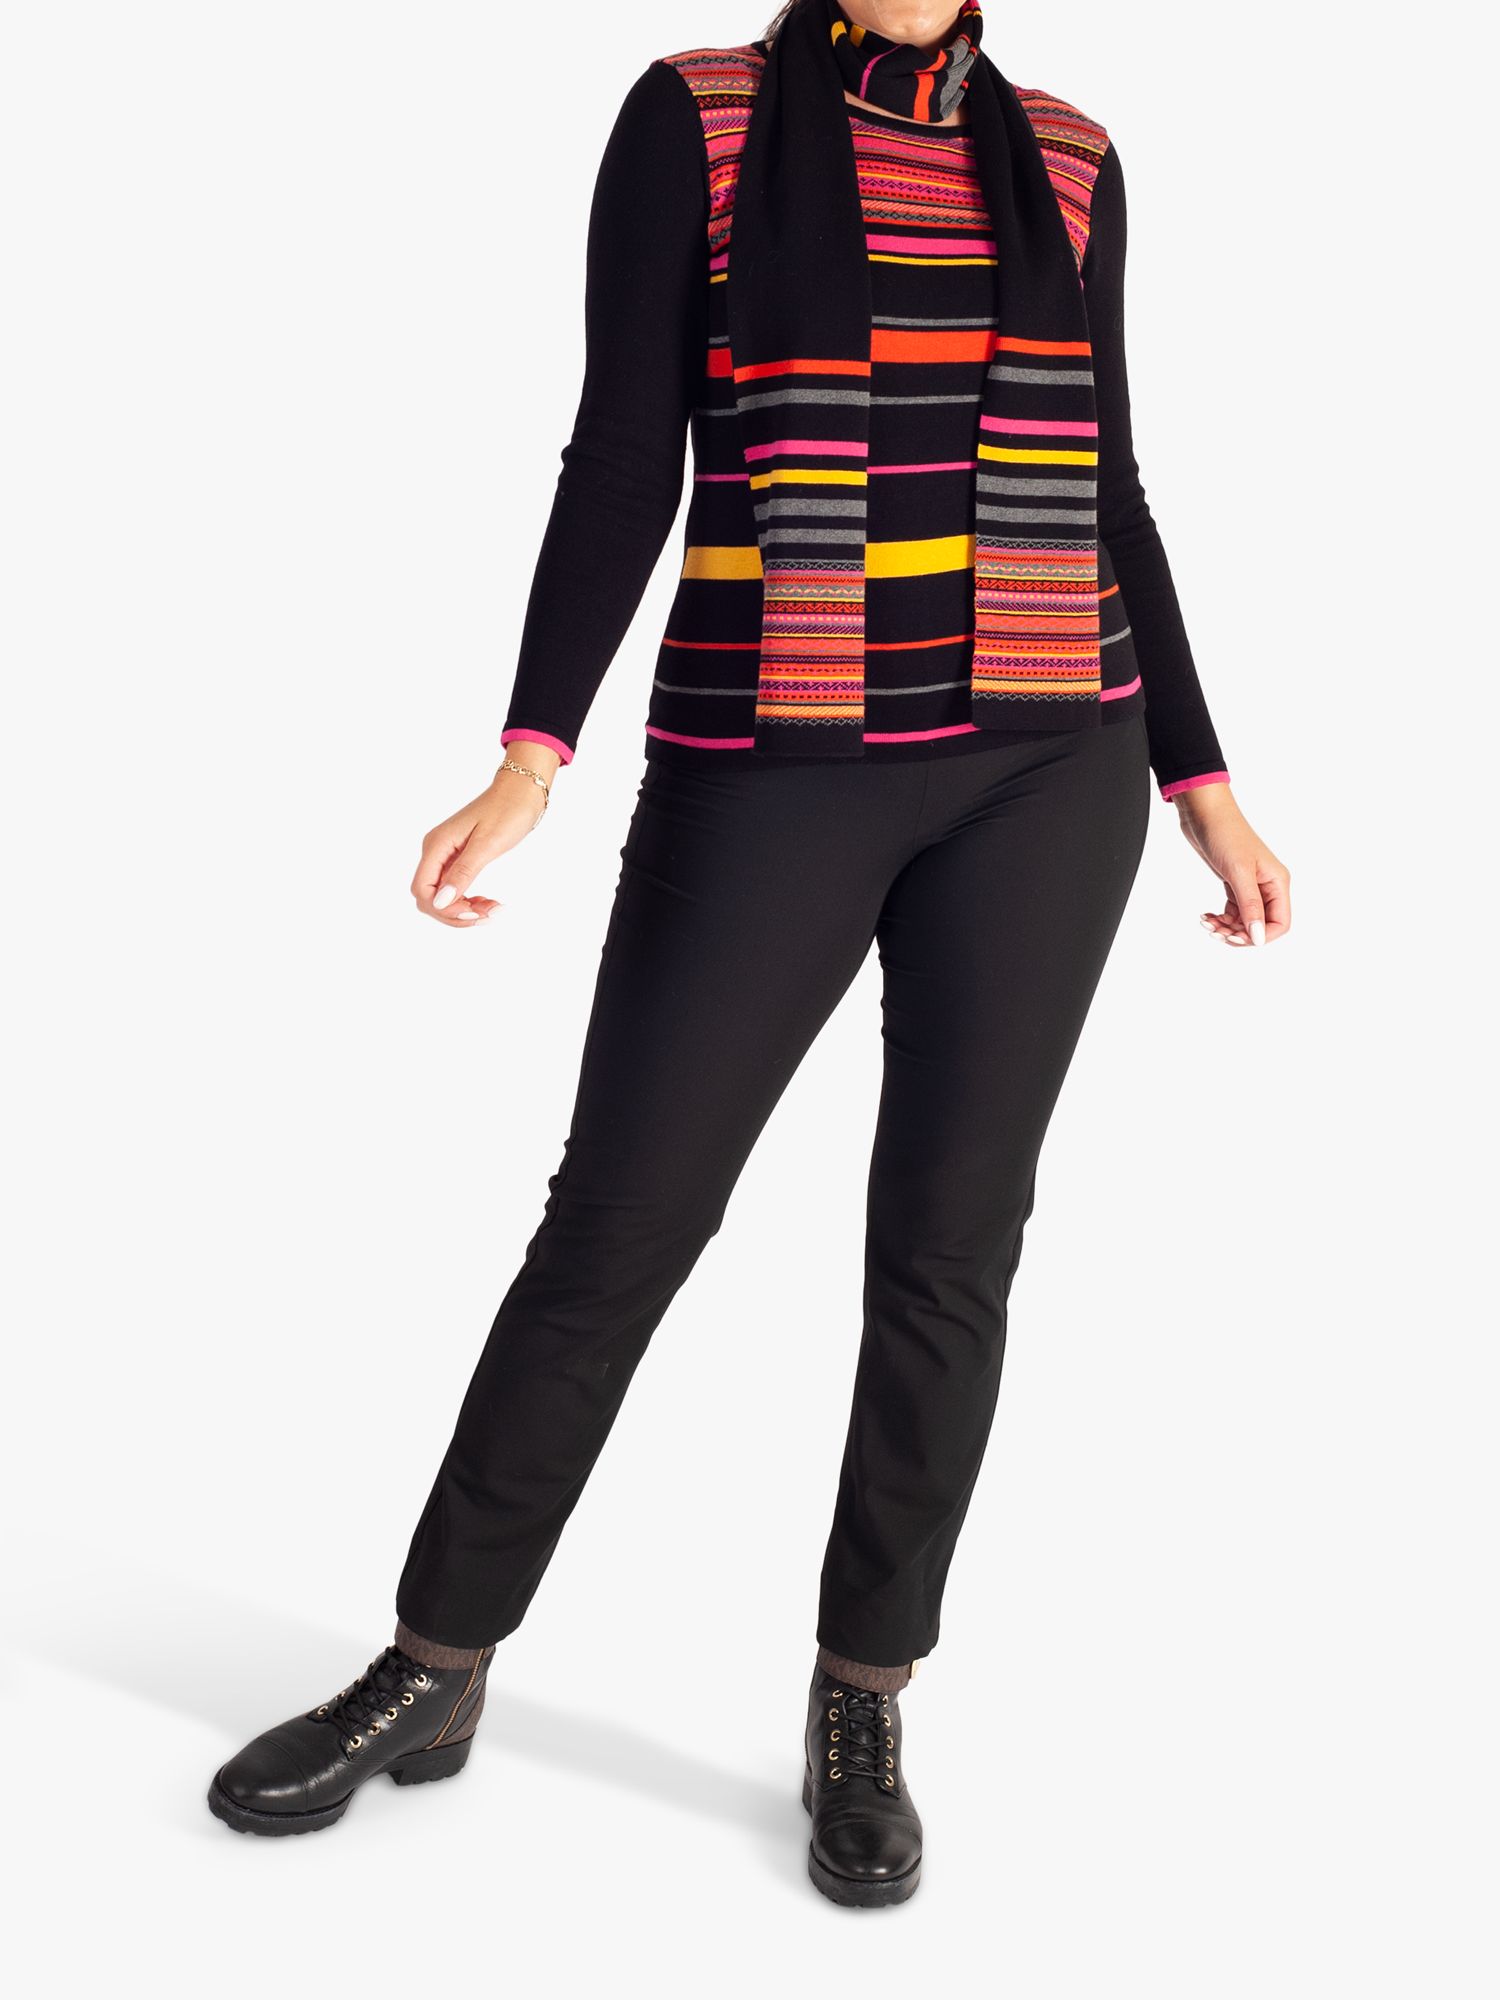 Buy chesca Striped Jumper with Scarf Online at johnlewis.com